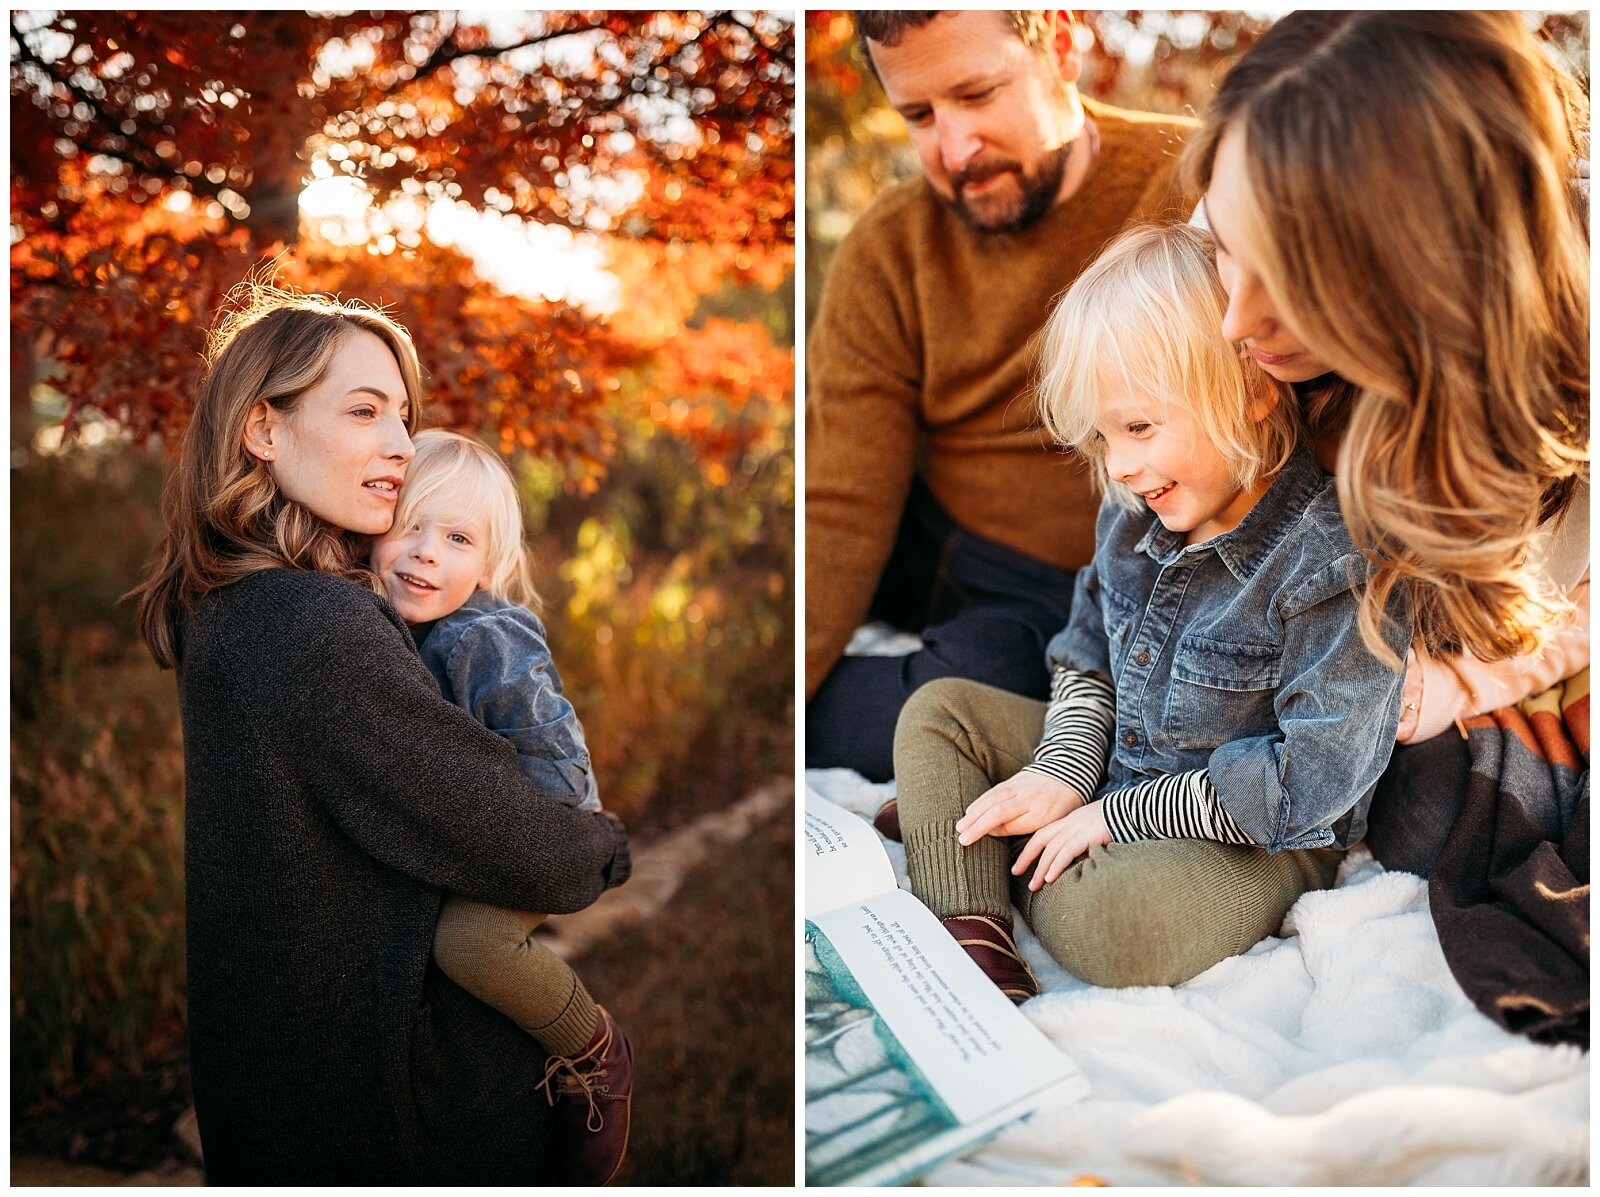  Mother cuddles with her son in the golden autumn light, Kansas City mommy and me session, Rebecca Clair Photography 